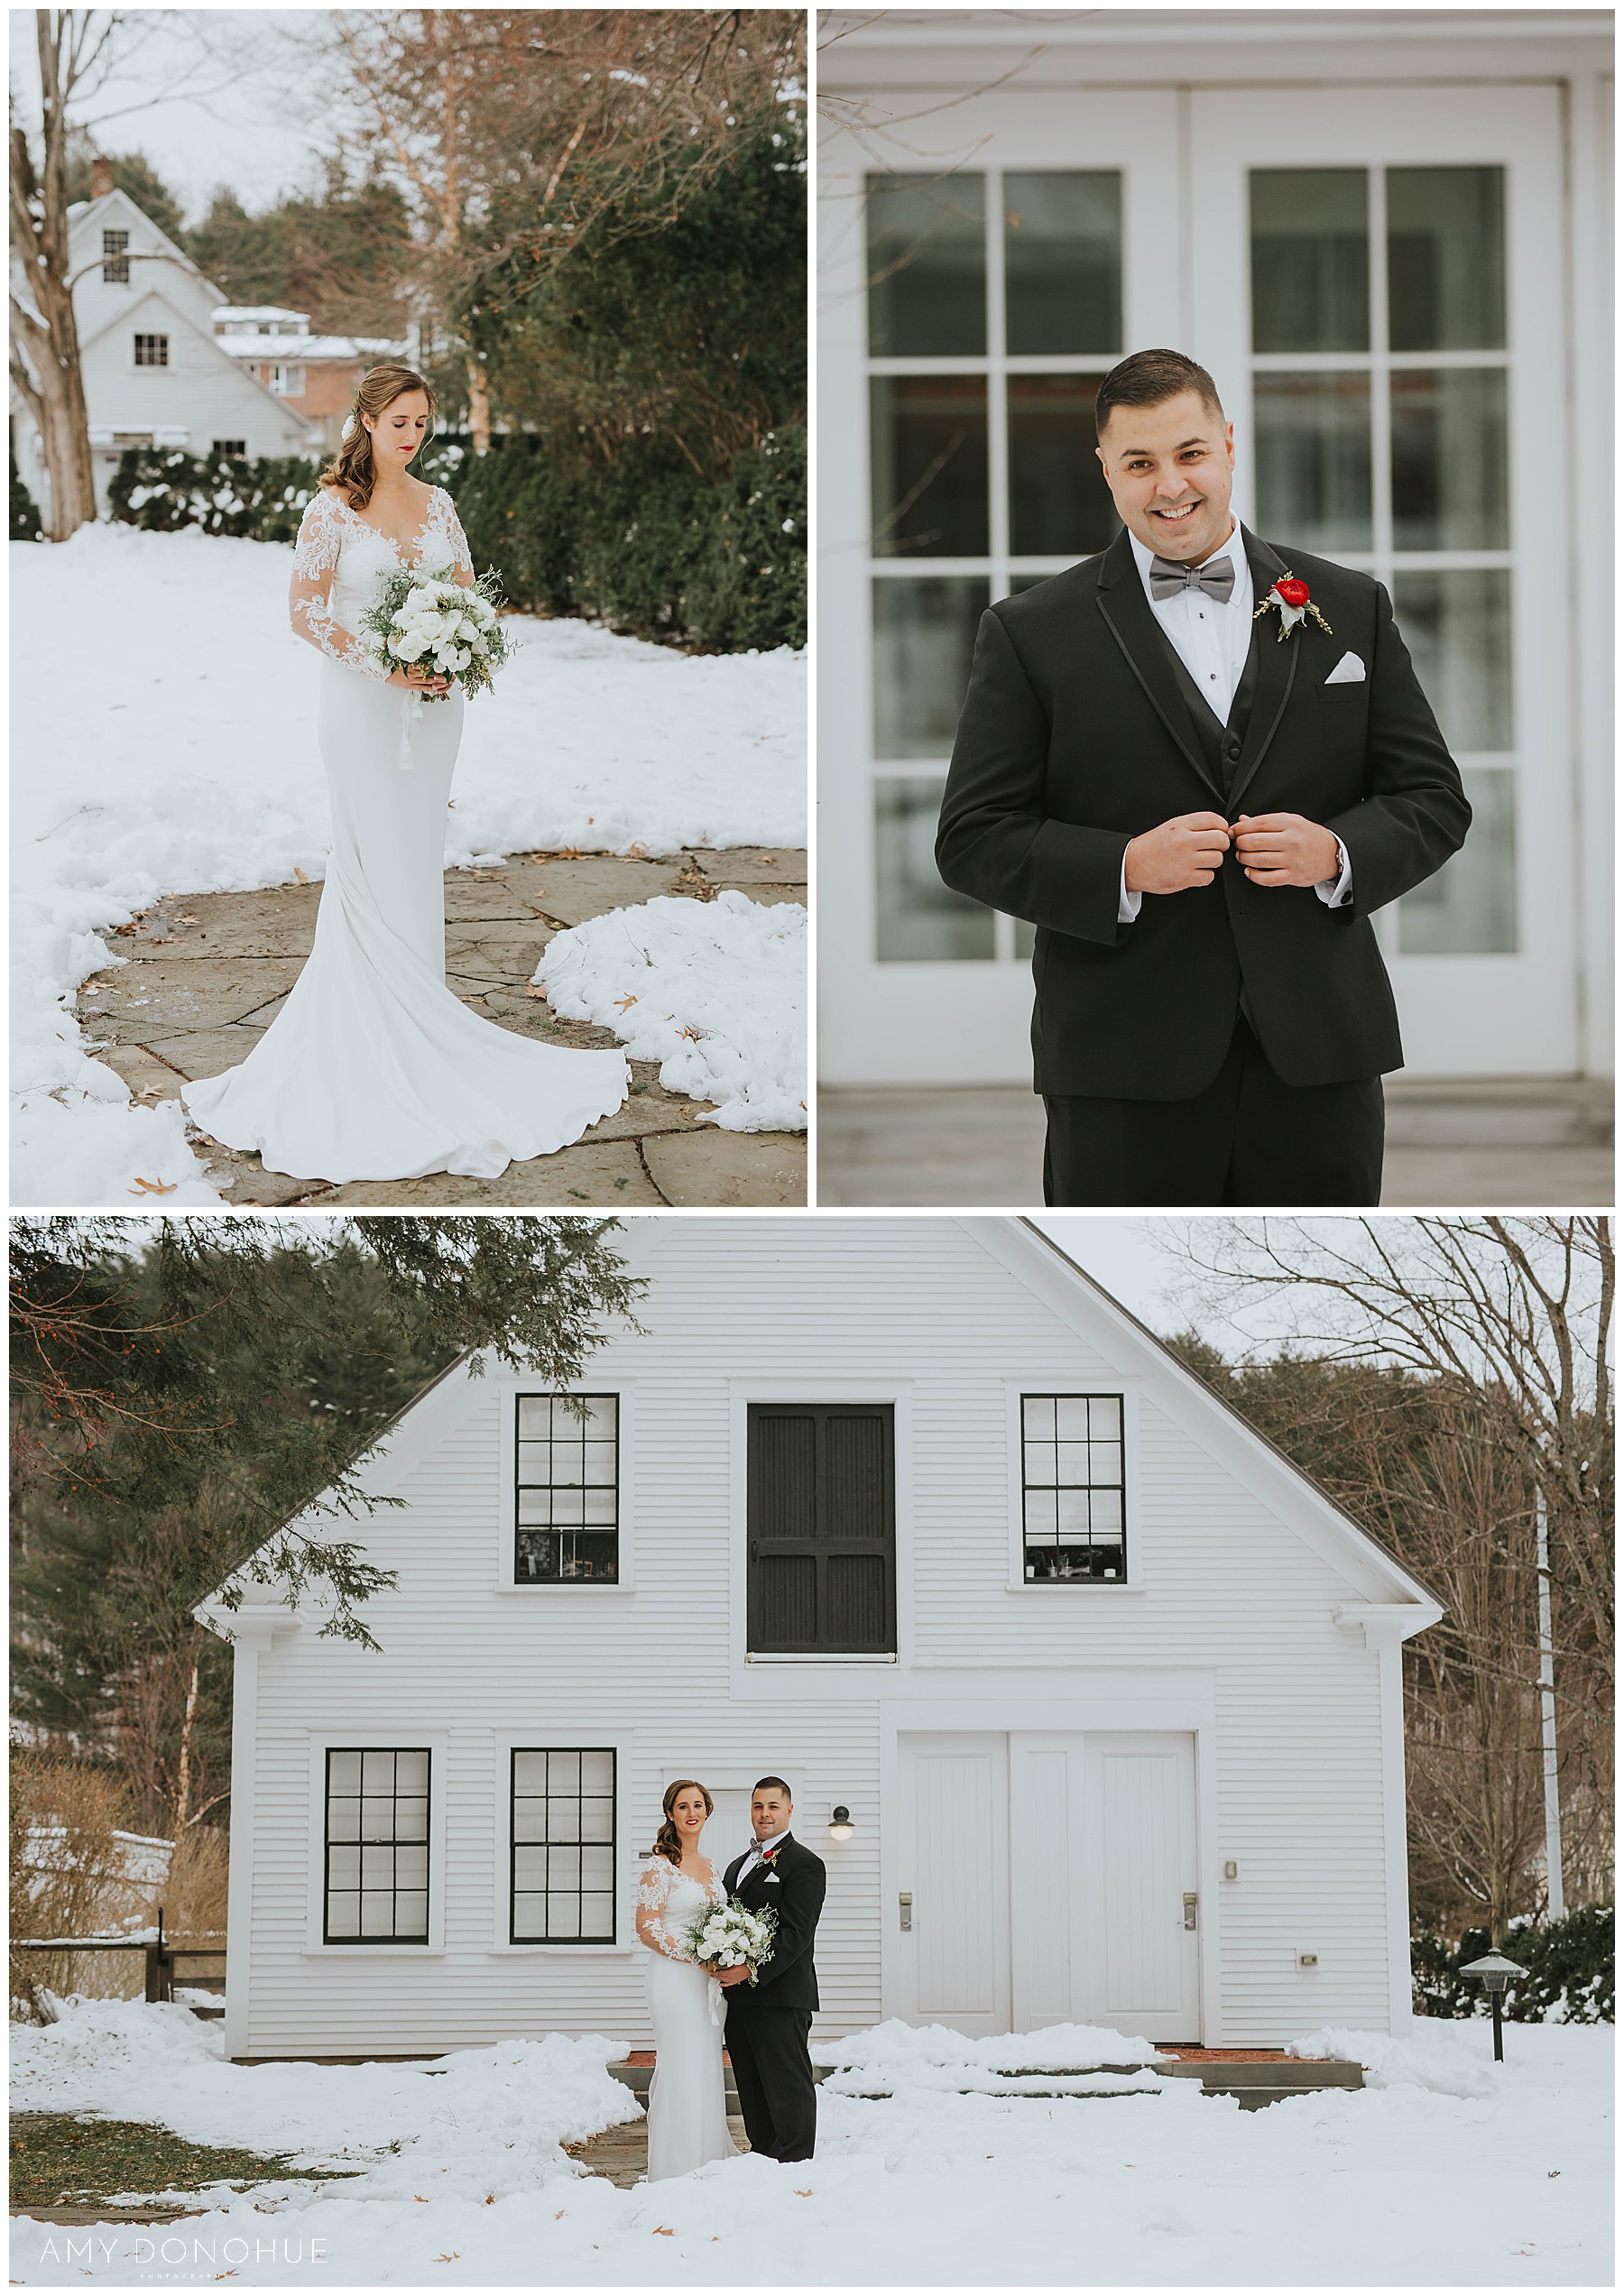 Authentic Bride and Groom Portraits | Woodstock Inn & Resort | VT Wedding Photographer | © Amy Donohue Photography